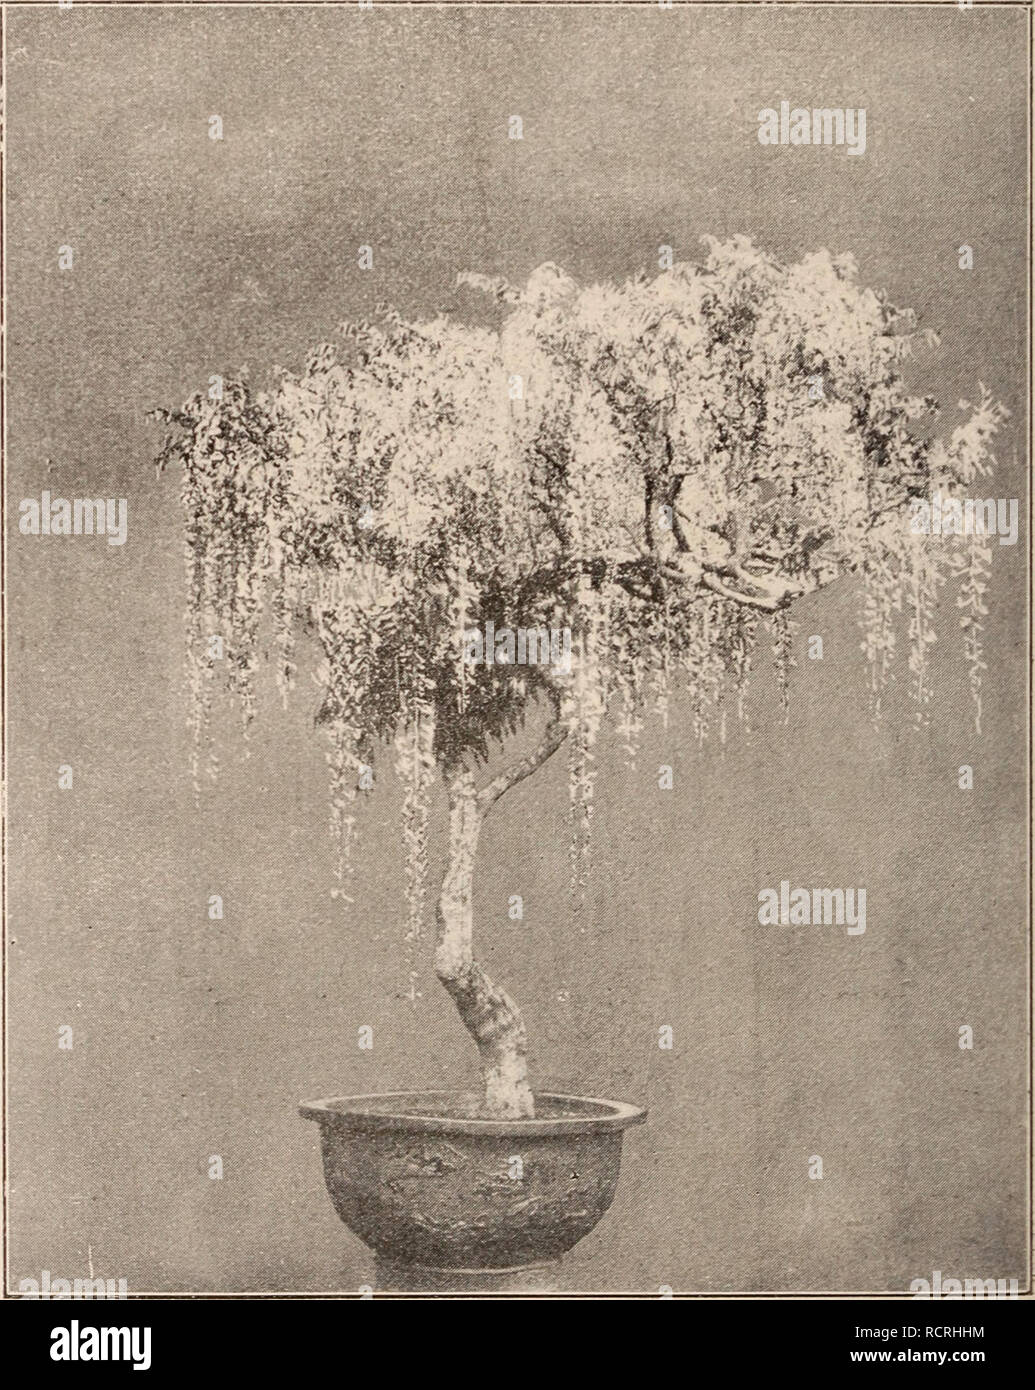 . Descriptive catalogue of flowering, ornamental trees, shrubs, bulbs, herbs, climbers, fruit trees, &amp;c., &amp;c., &amp;c. / for sale by the Yokohama Nursery Co., Limited.. Nursery Catalogue. ,sii;)irriA ukifi.oea, Hediim Slet)oldi, pemmiiil clustered pink flowers, very fine, J inch across suitable for hano iug baskets—per 10, $1.31). S a radicans, pretty alpine plant belonging to Saxifraga familv—per 10 $1.00. Therniopsis fabaeea, sho^^y y e 11 o w p a i 1 i o naceous flv)wer, ornamental per- ennial—per 10, $1.30. Tricyrtis Japonica, av h i t e flower spotted a ith purple —per 10, $1.00. Stock Photo